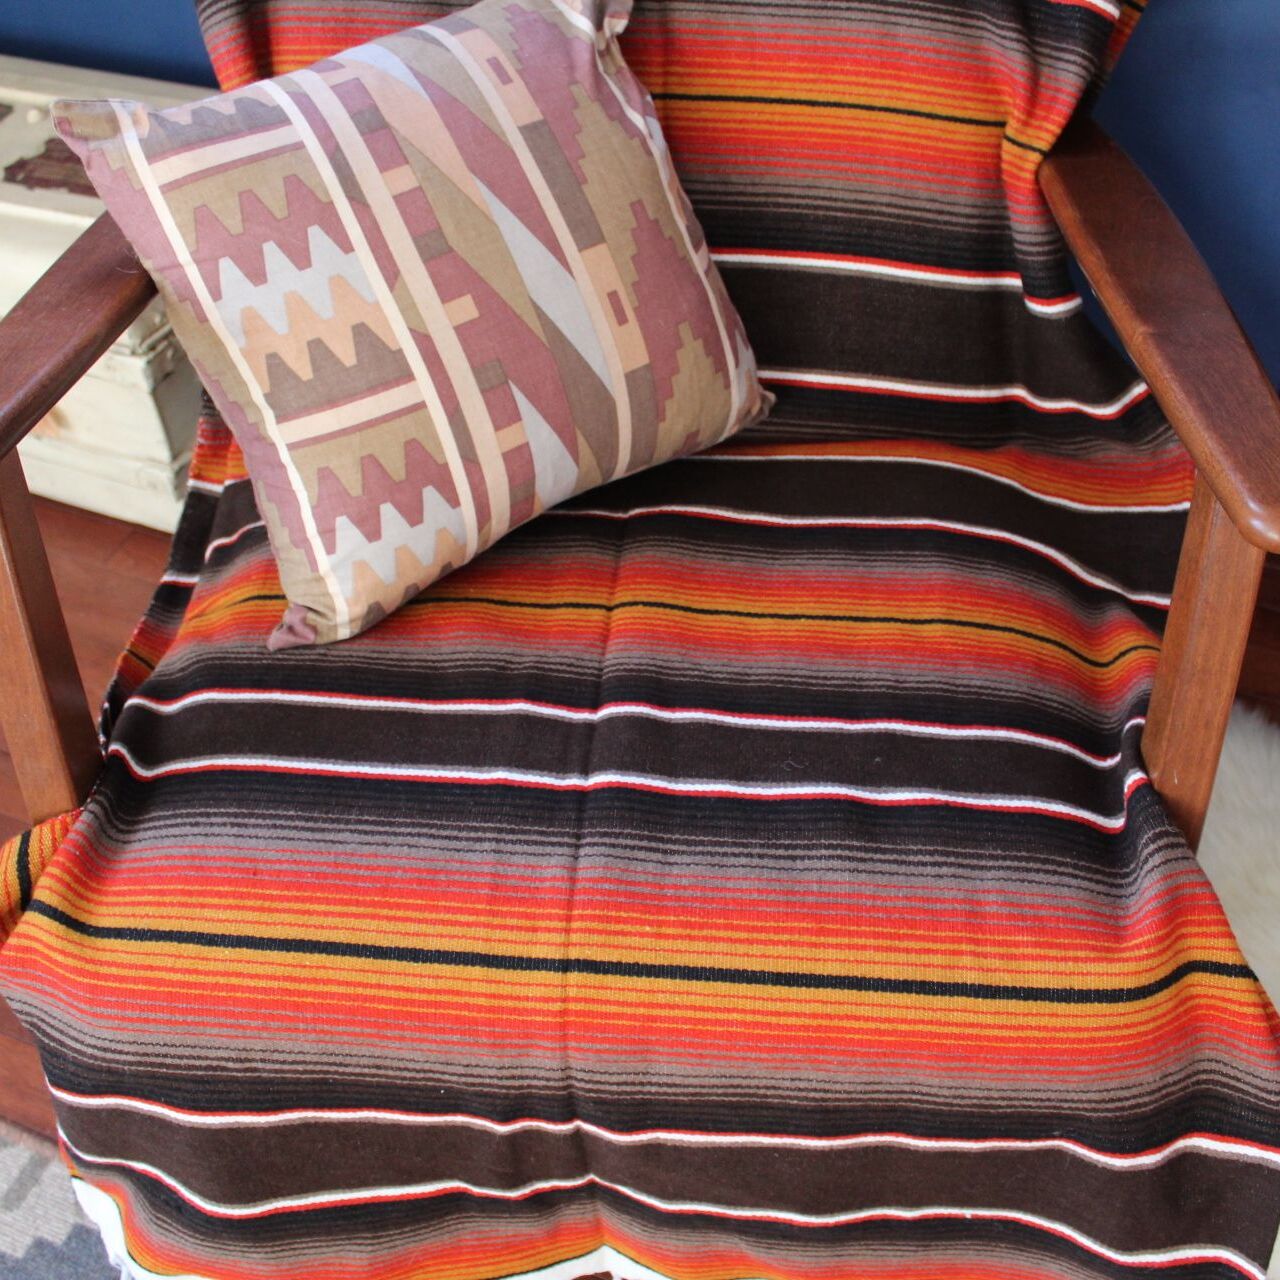 Biker bed roll up tote wrap with Isla brown serape mexican blanket